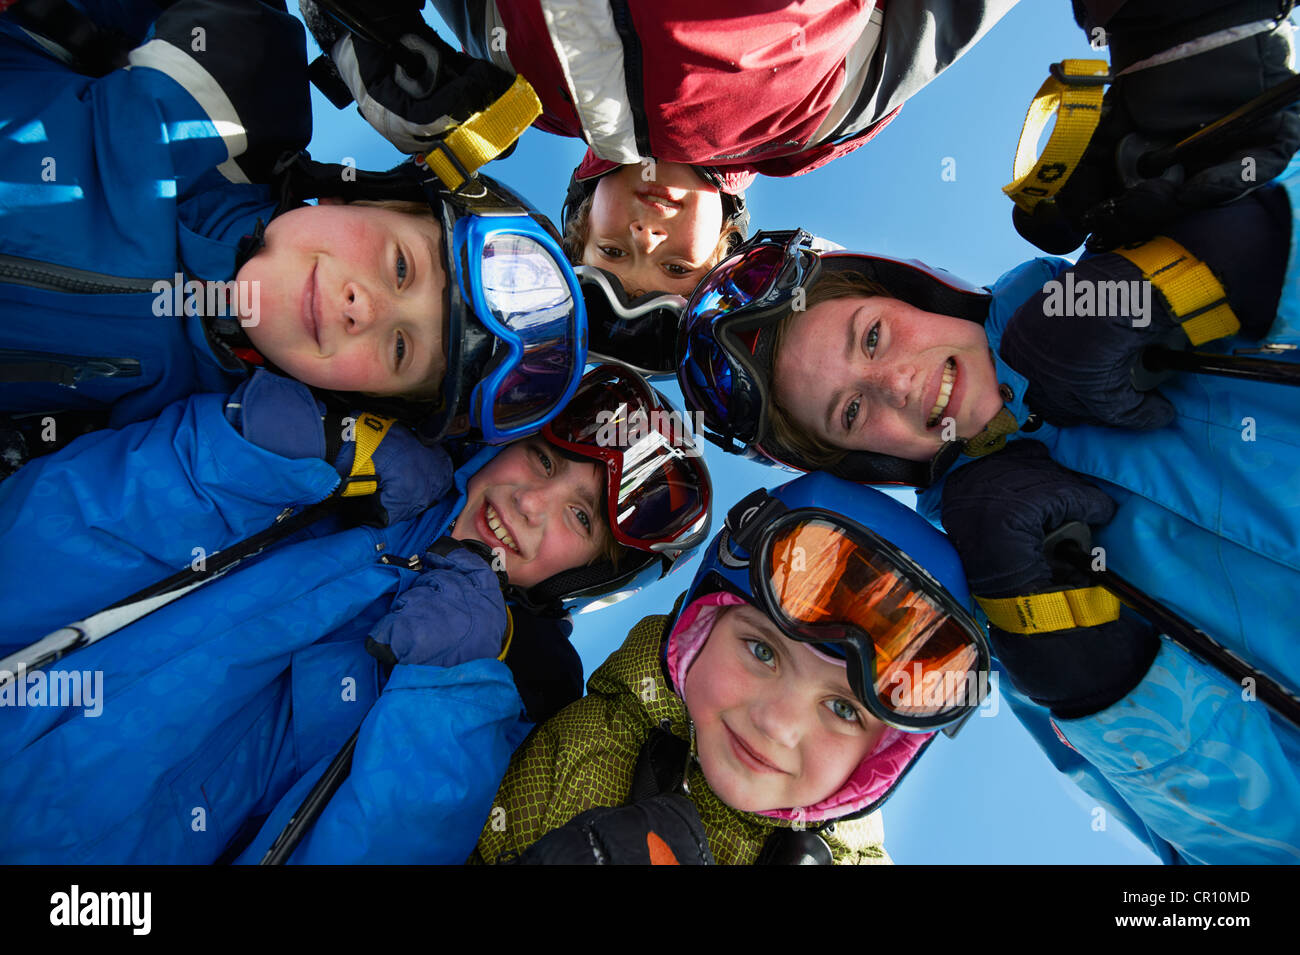 Children in ski gear standing together Stock Photo